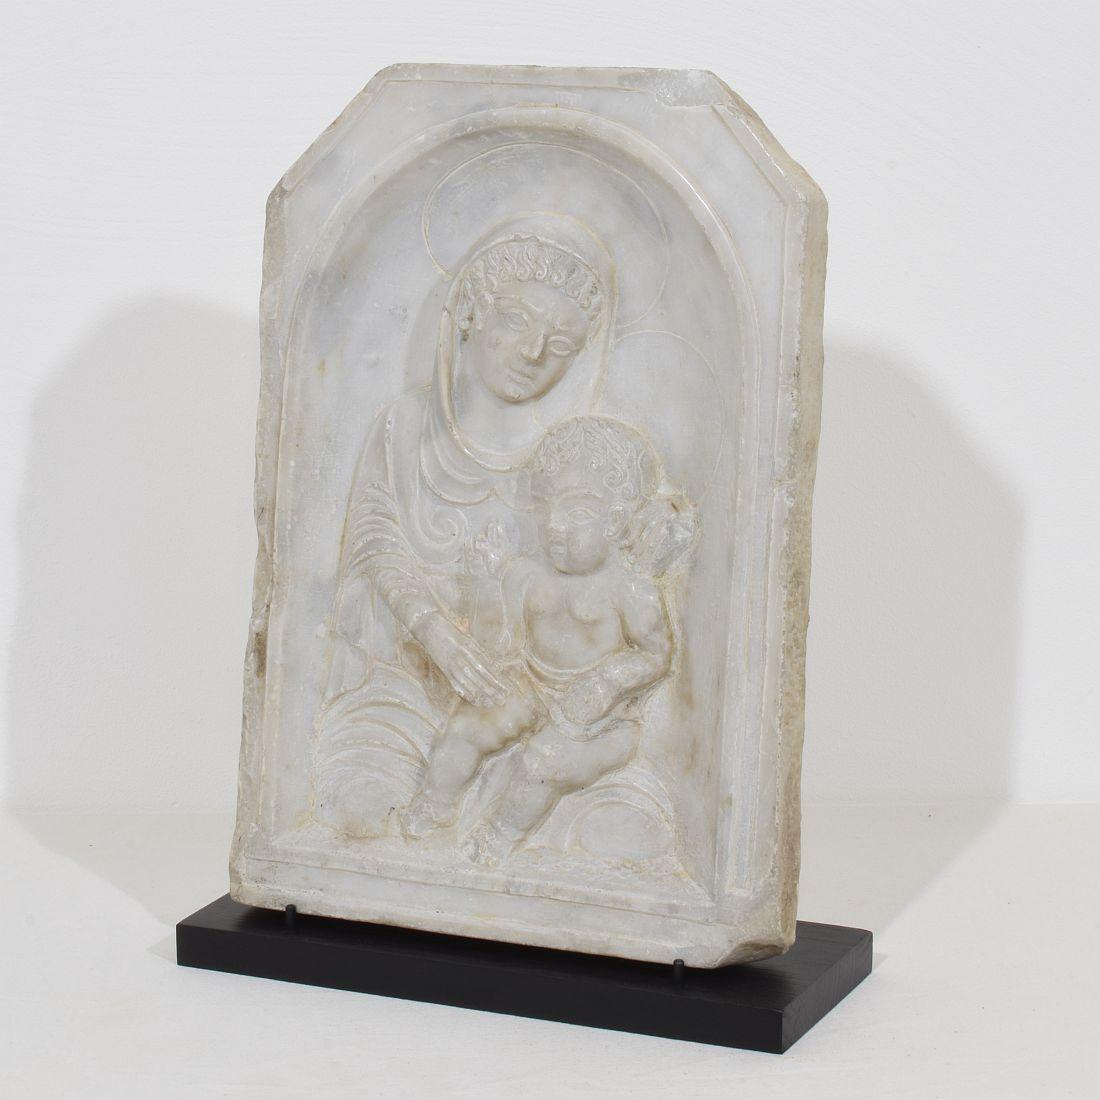 Wonderful 17 century marble panel with a Madonna and child. Gorgeous period piece with great patina.
Italy circa 1650. Weathered and small losses.
Measurement include the wooden pedestal.